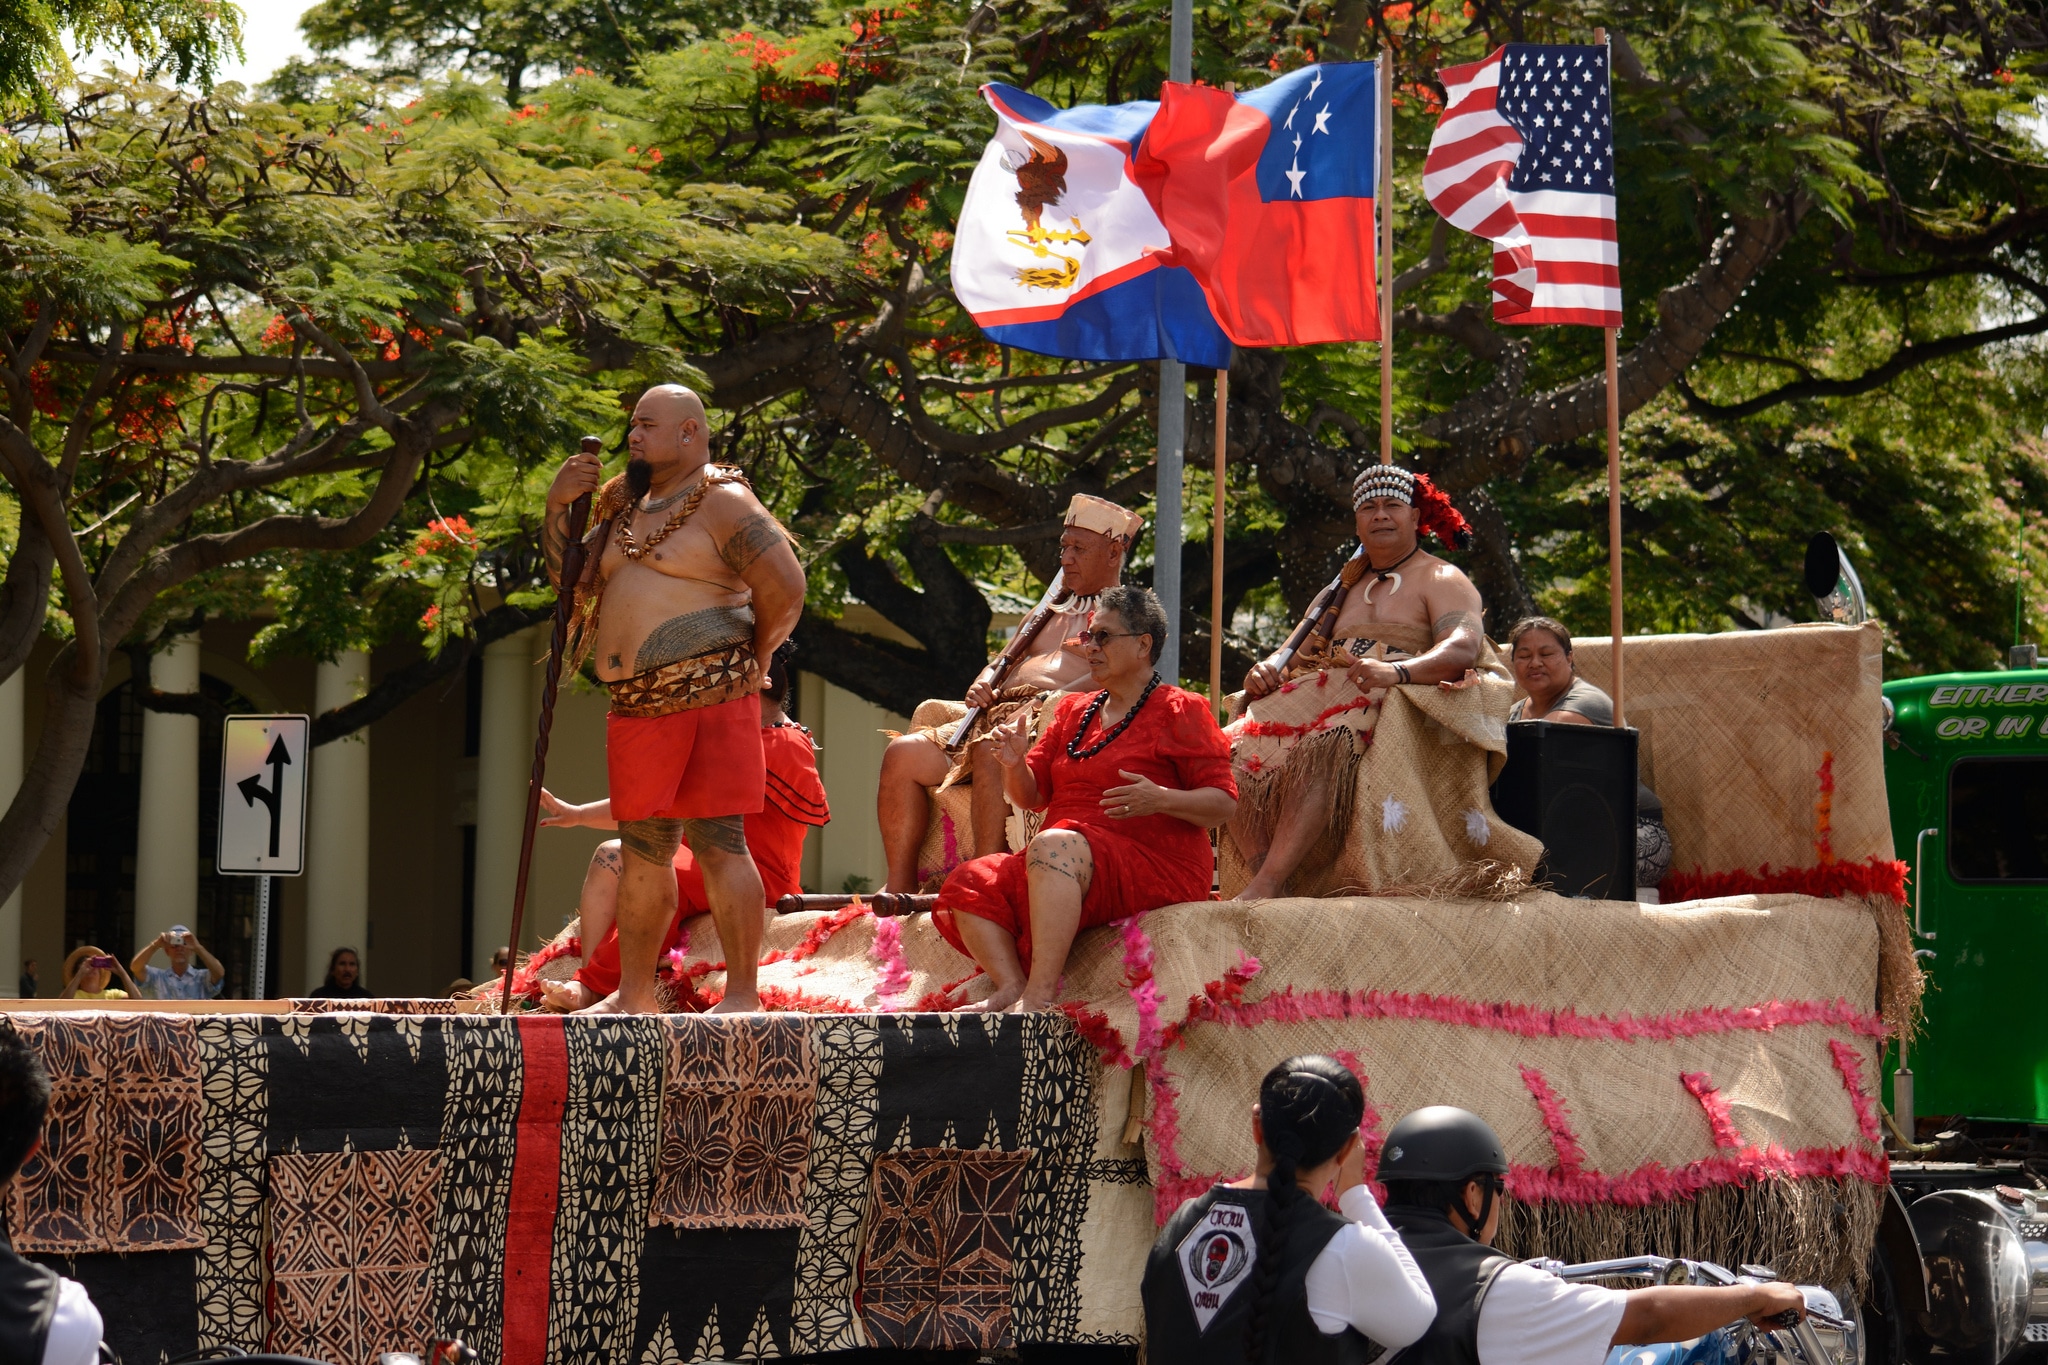 American Samoans are not American citizens